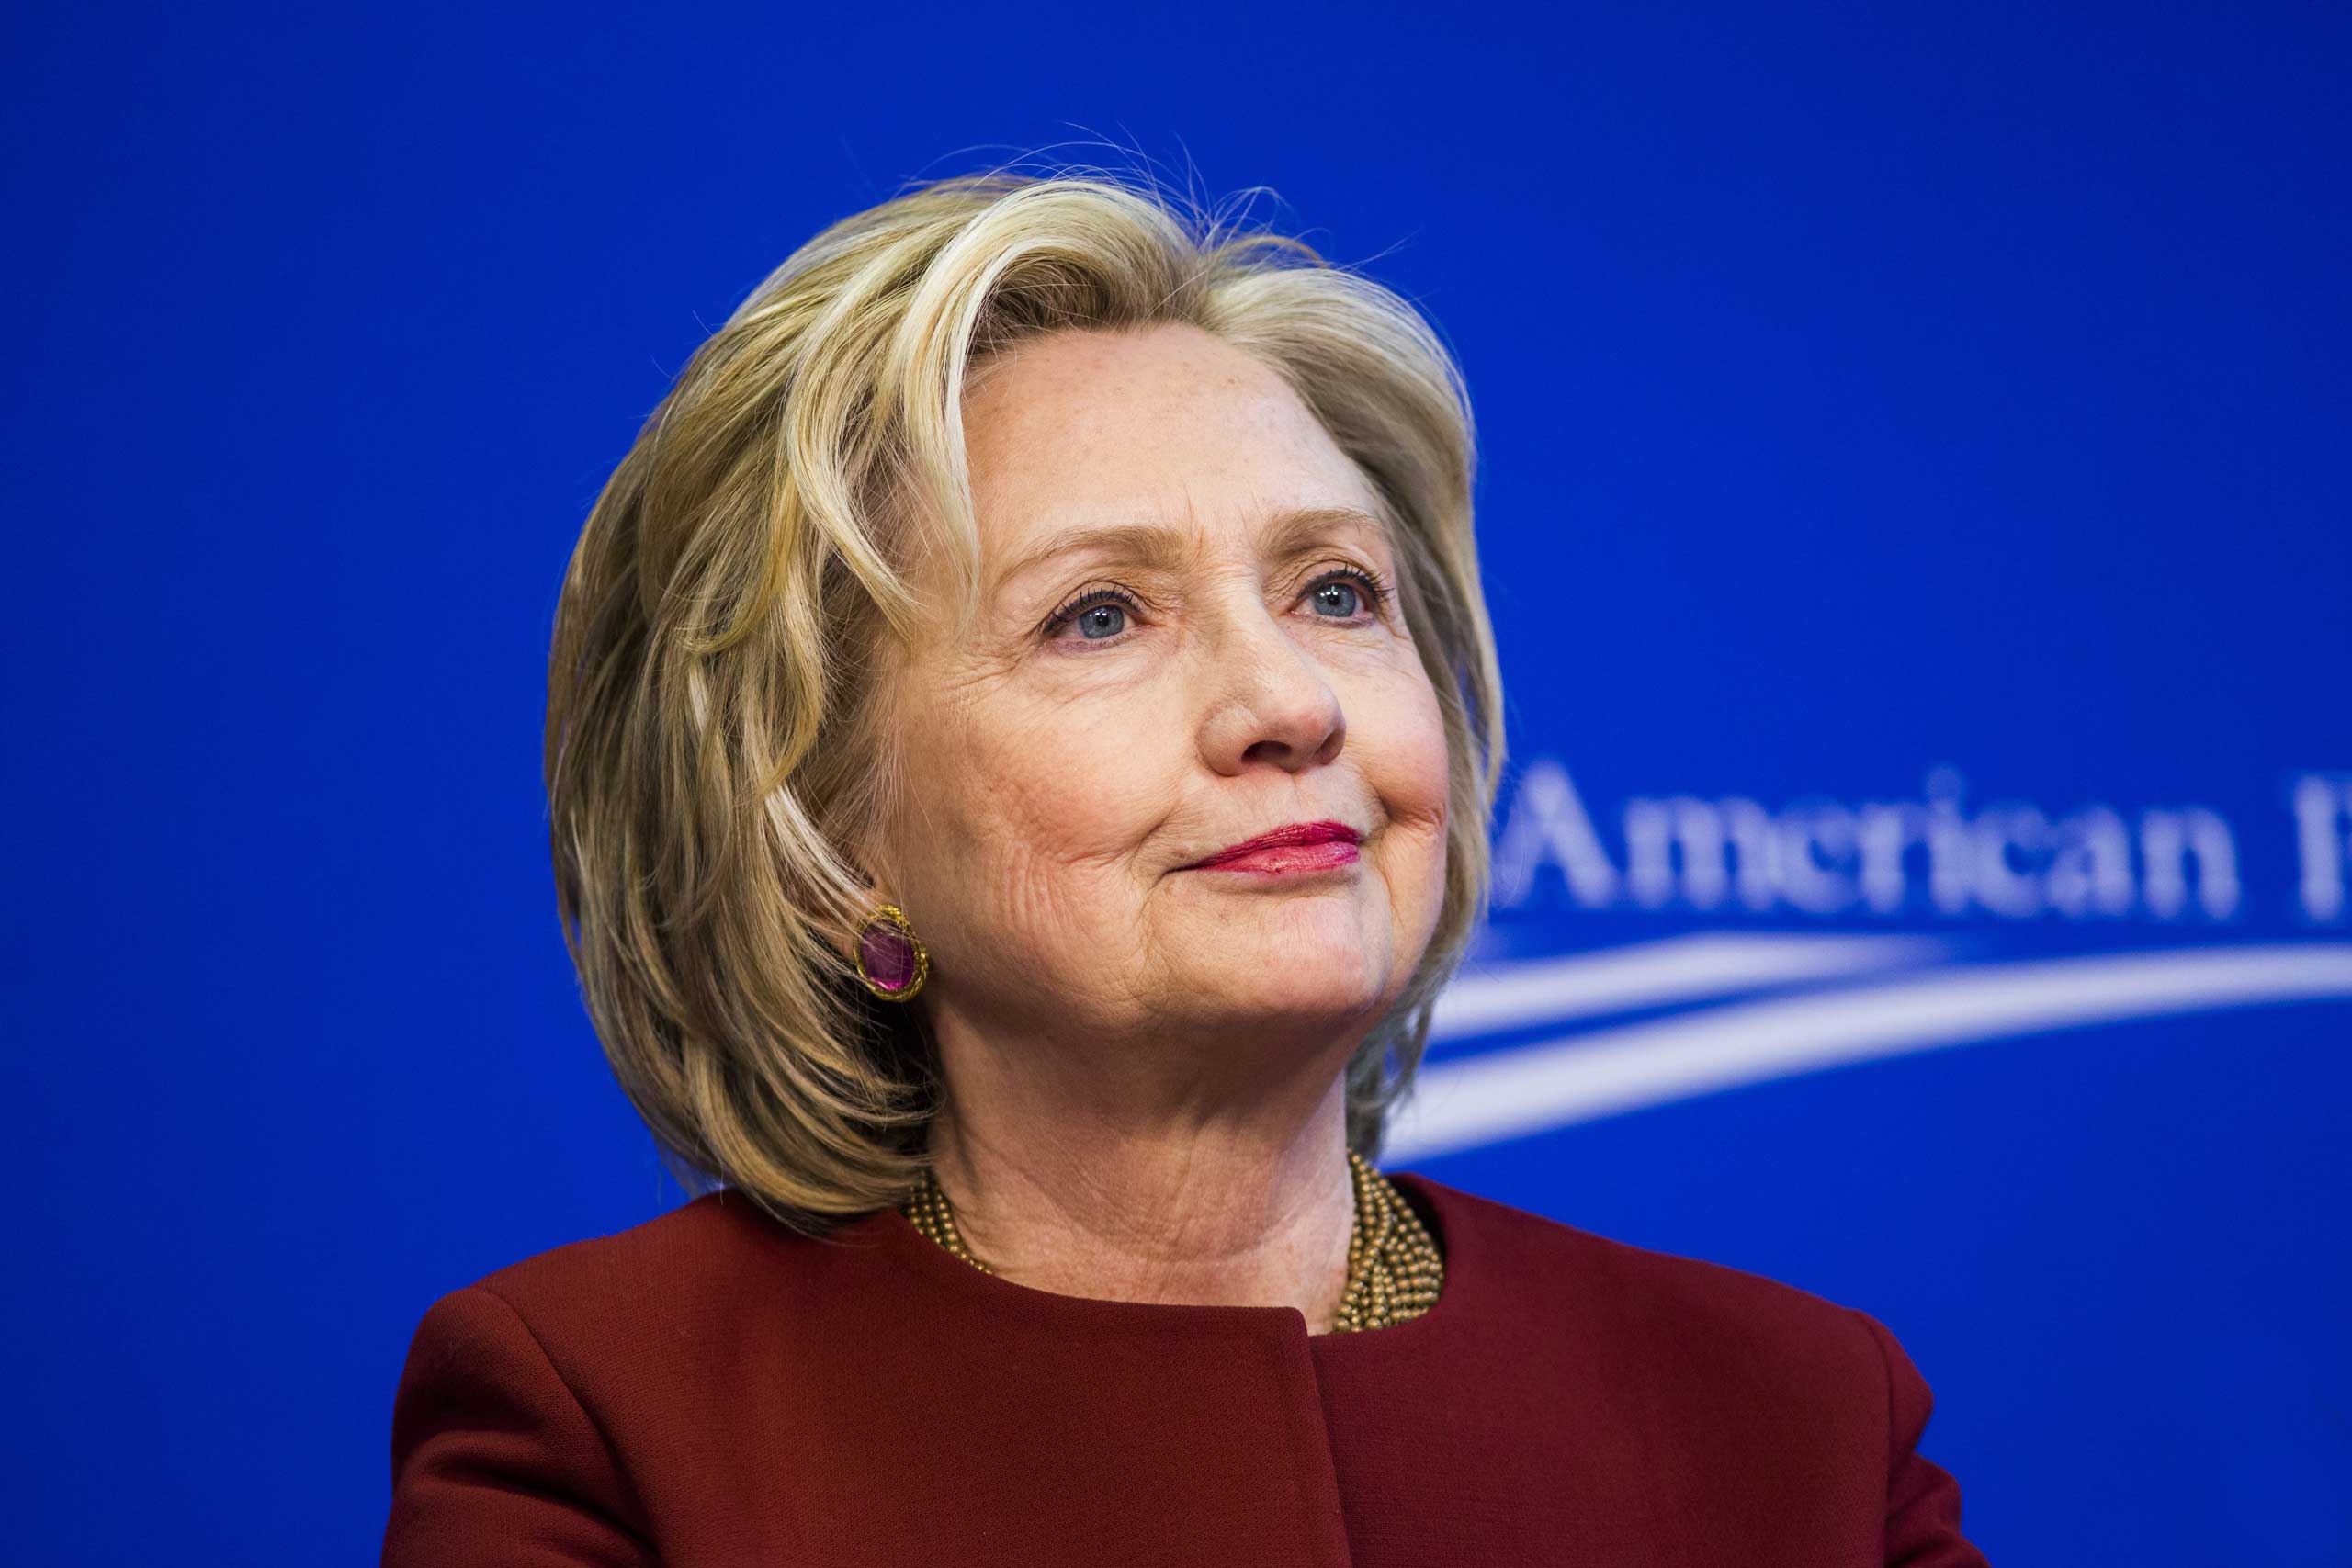 Former U.S. Secretary of State Hillary Clinton takes part in a Center for American Progress roundtable discussion on "Expanding Opportunities in America's Urban Areas" in Washington on March 23, 2015.